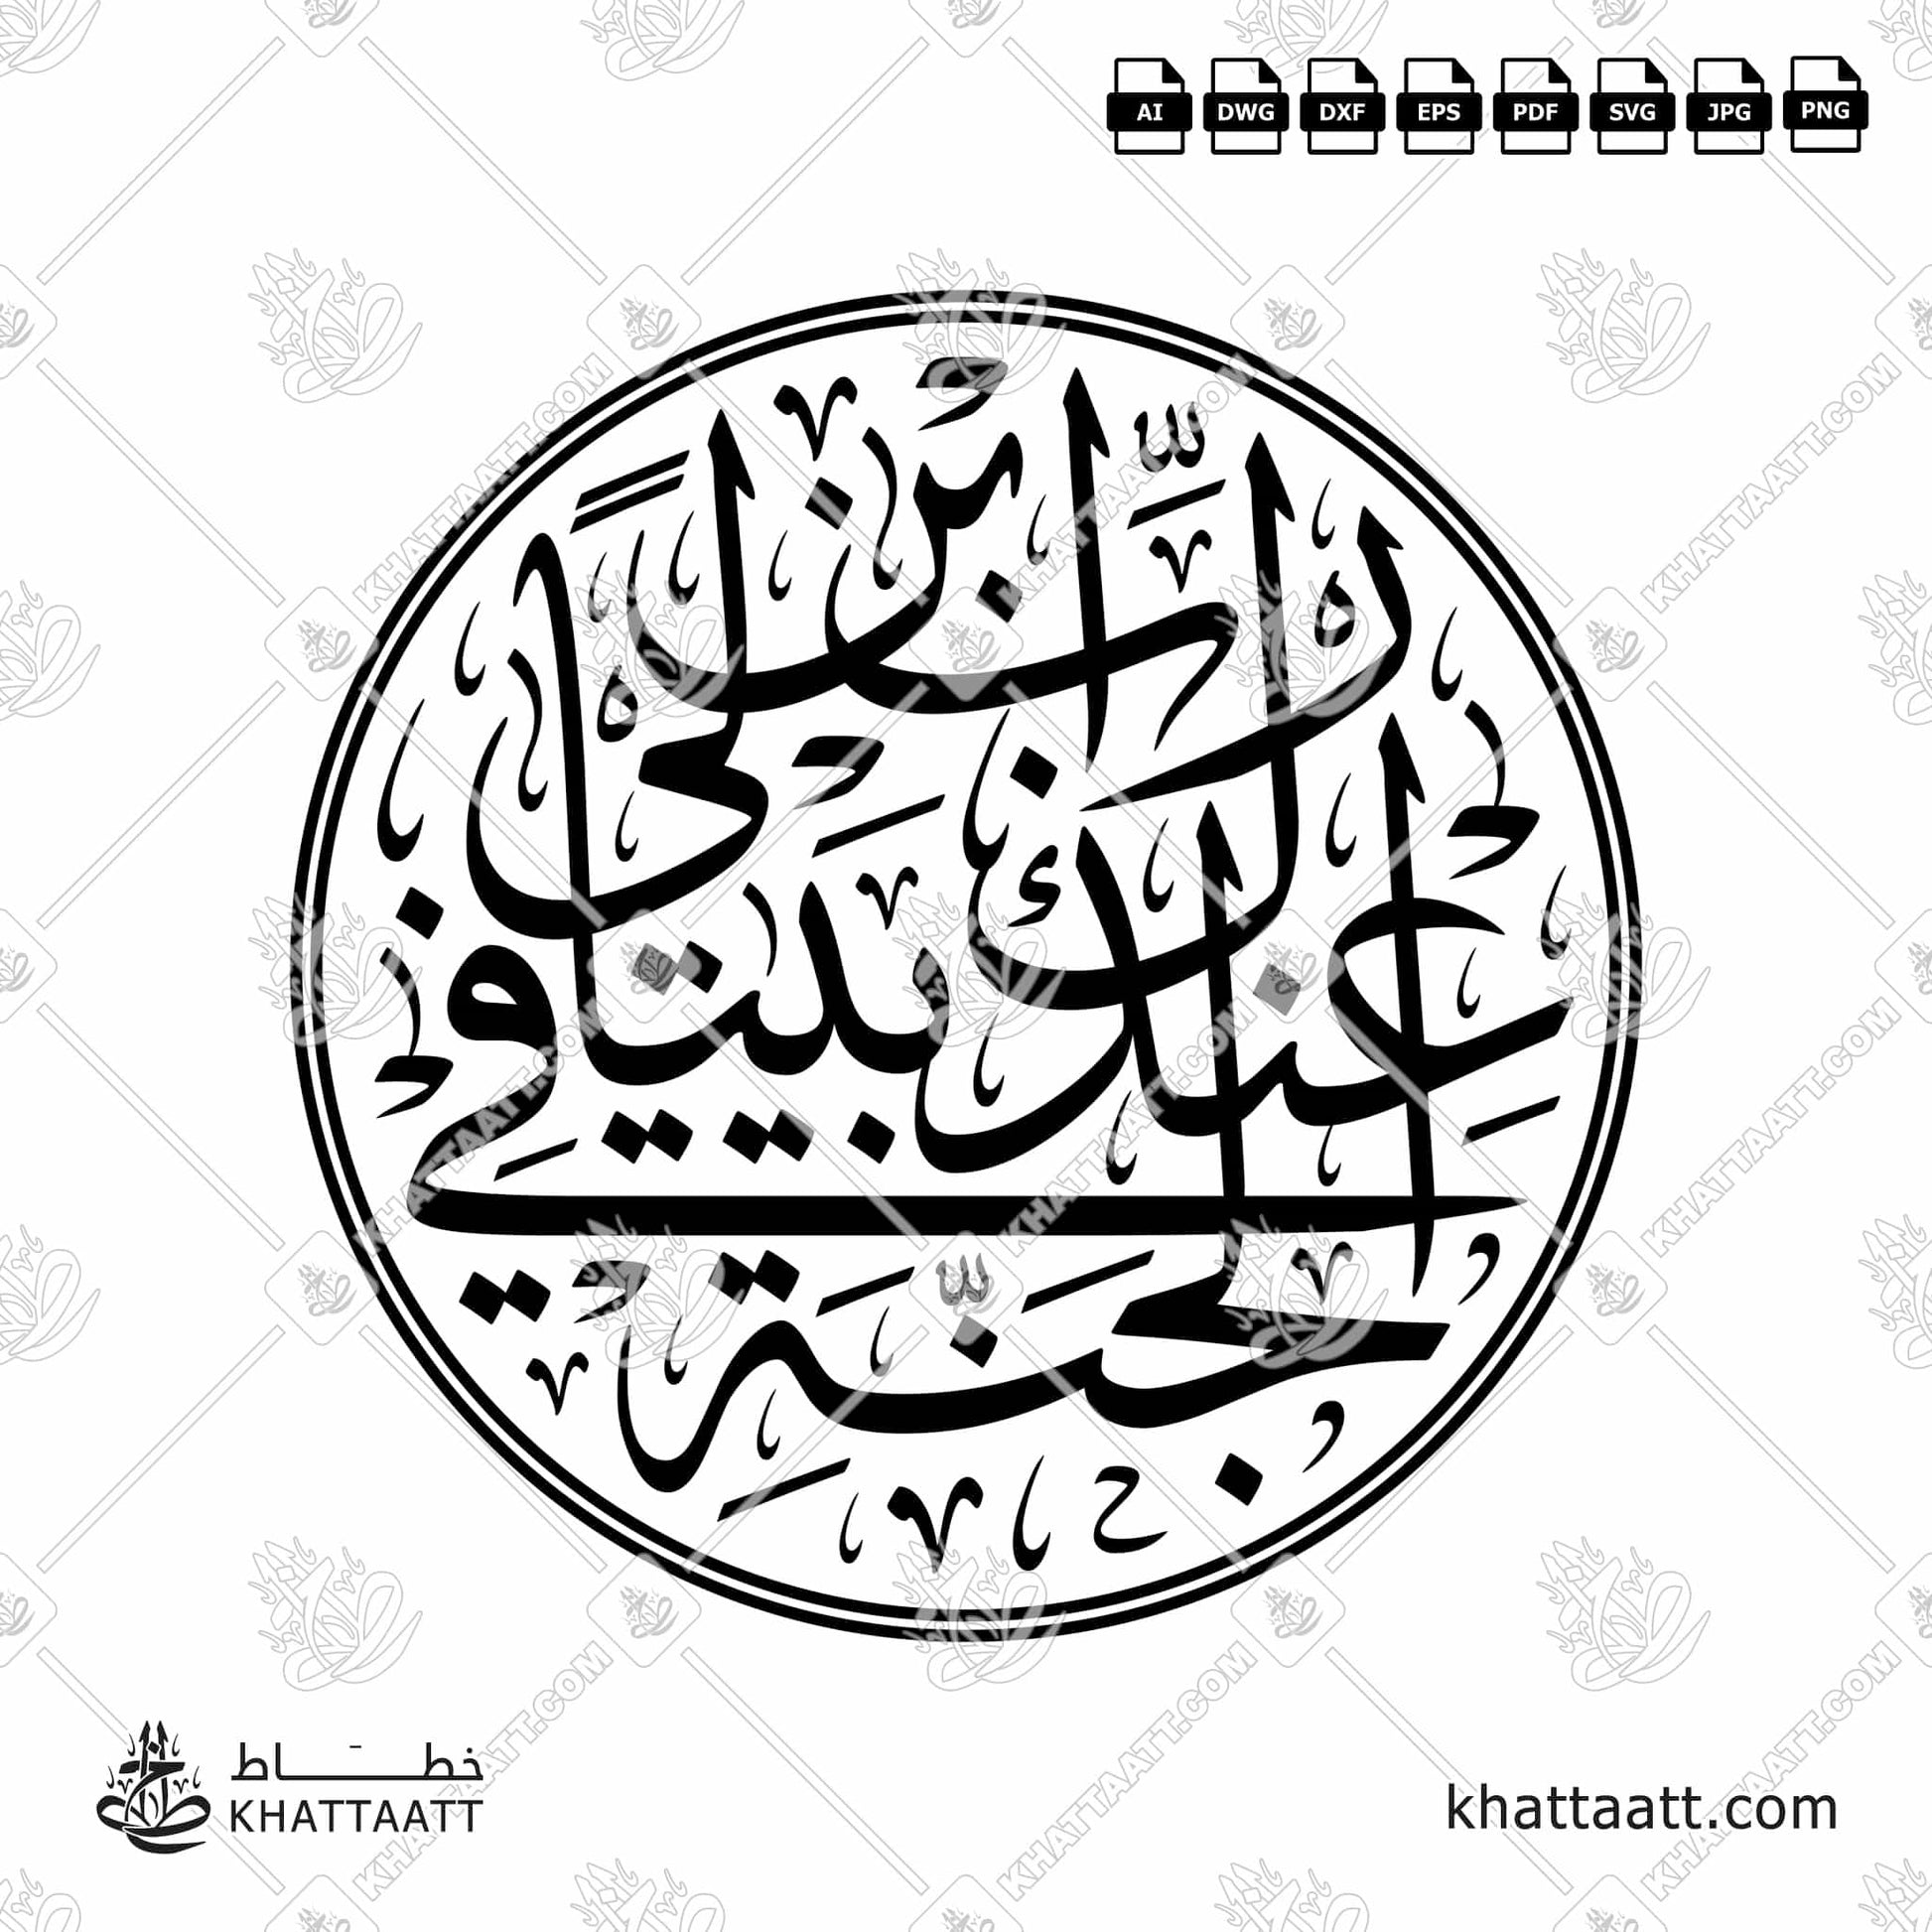 Arabic Calligraphy of رب ابن لي عندك بيتاً في الجنة Surat At-Tahrim سورة التحريم of the Quran in Thuluth Script خط الثلث My Lord, build for me near You a house in Paradise